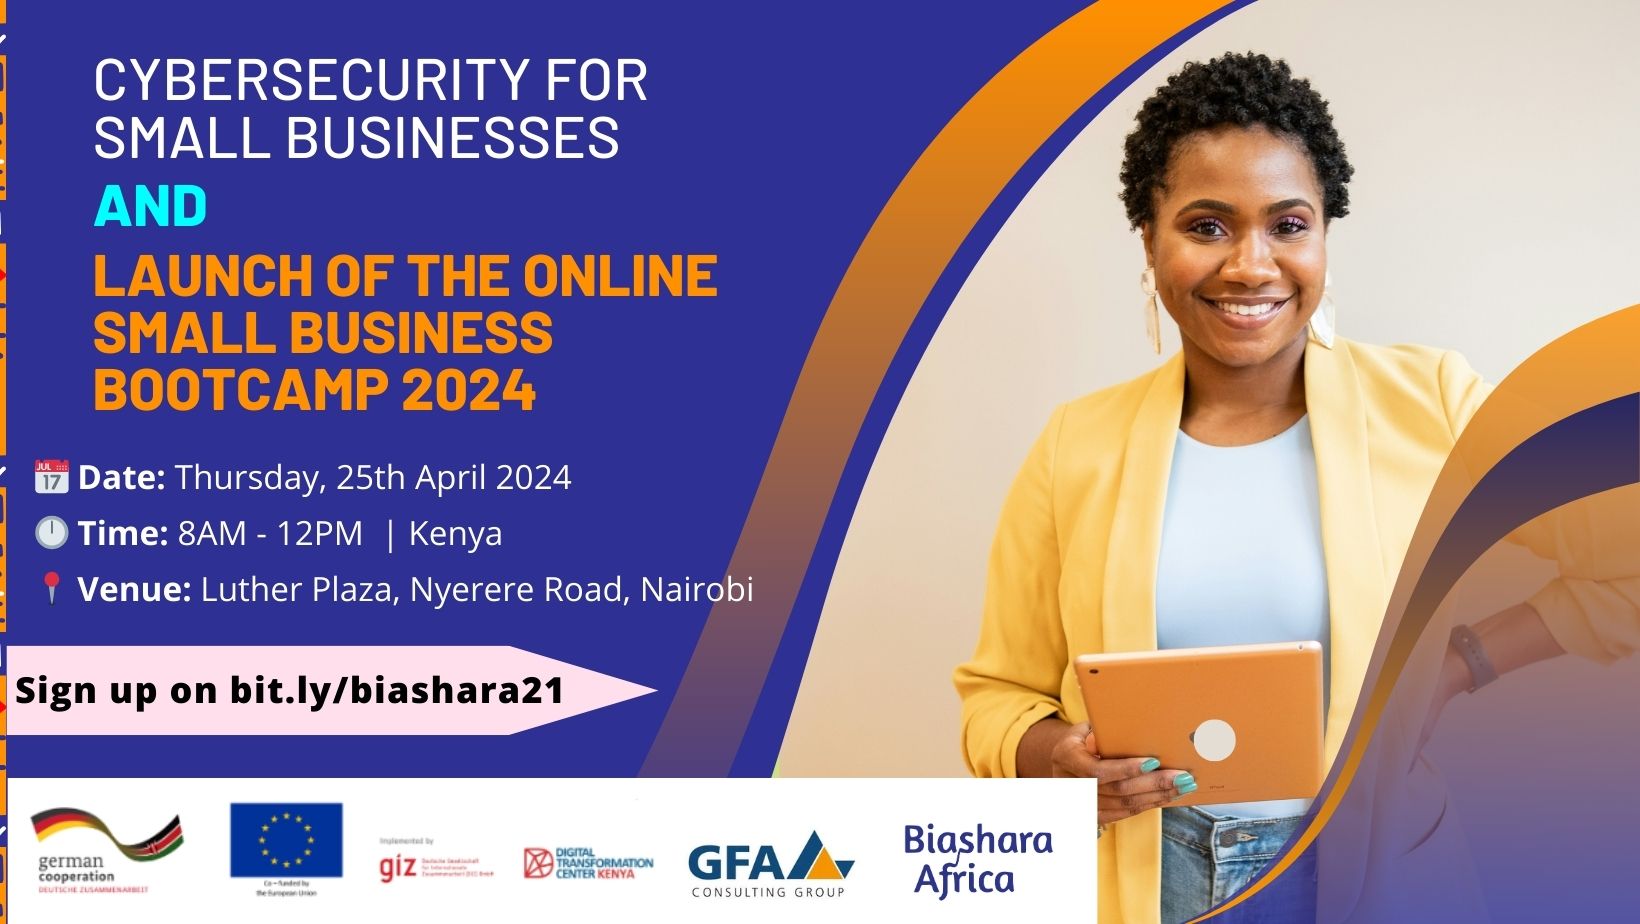 CYBERSECURITY FOR SMALL BUSINESSES AND LAUNCH OF THE ONLINE SMALL BUSINESS BOOTCAMP 2024